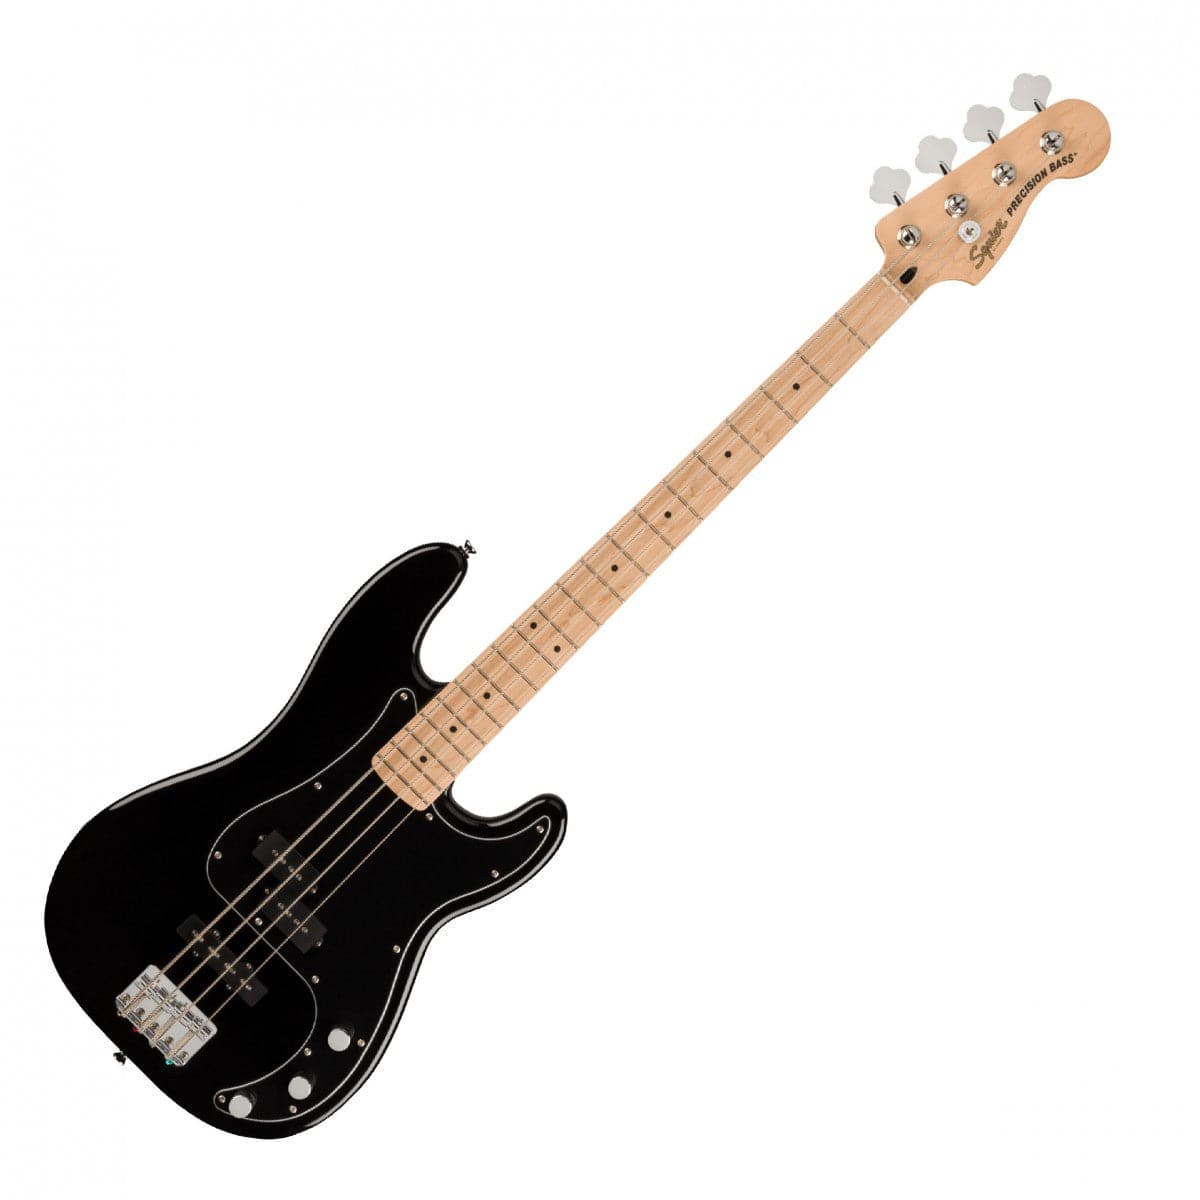 Squier Affinity PJ Bass with Fender Rumble 15 Amplifier Package - Black